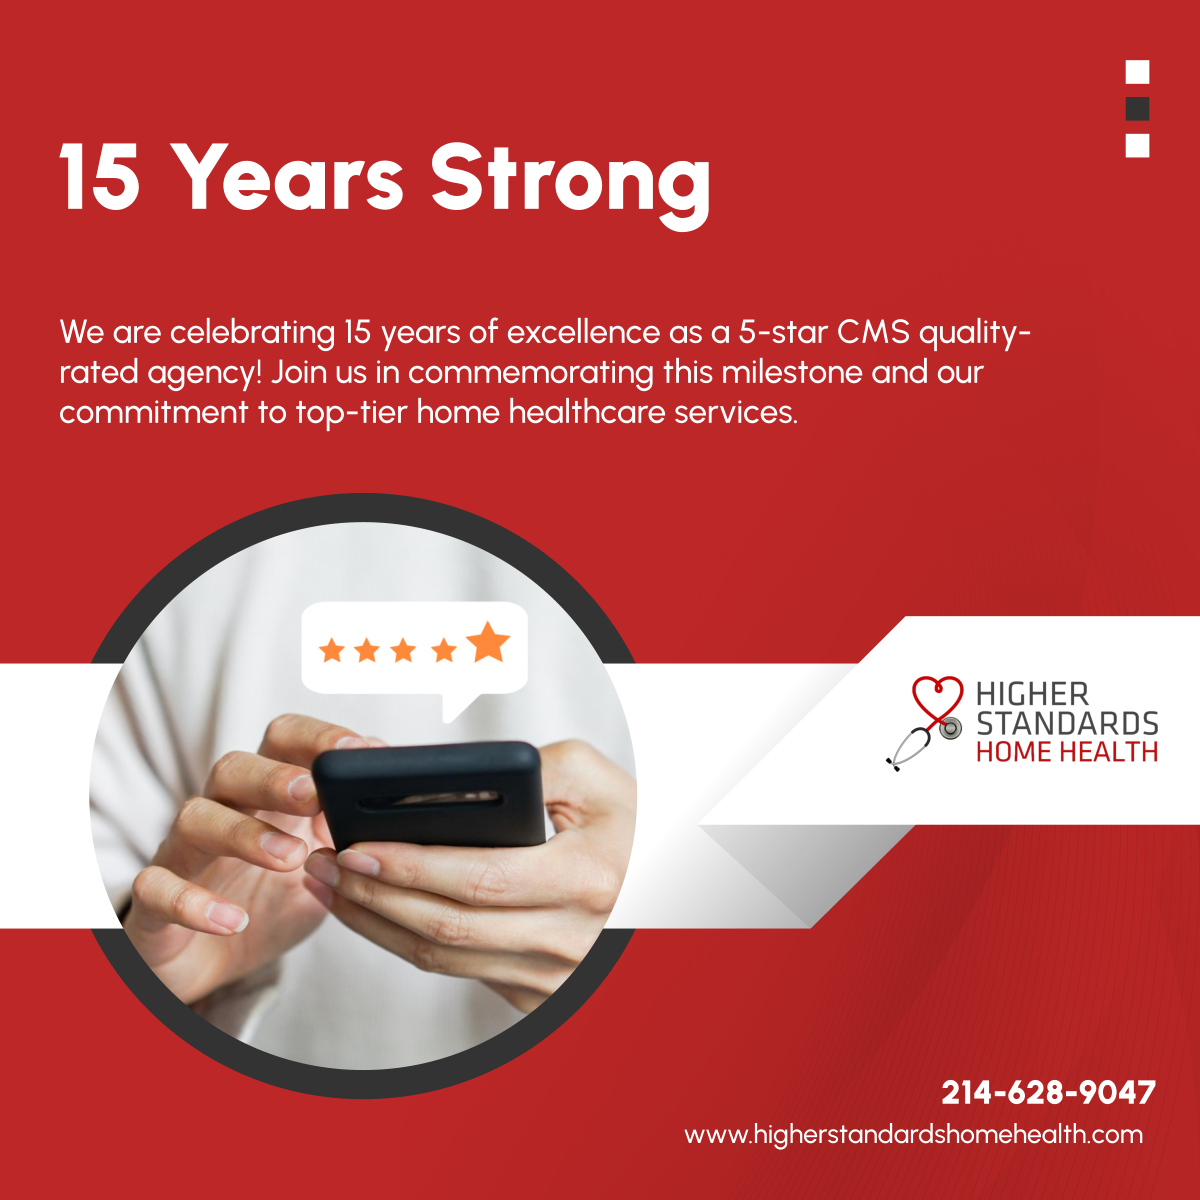 Join us in celebrating 15 years of excellence! As a 5-star CMS quality-rated agency, we're part of the top 6% nationwide. Thank you for trusting us for your care. 

#DallasTX #5StarAgency #HomeHealthCare